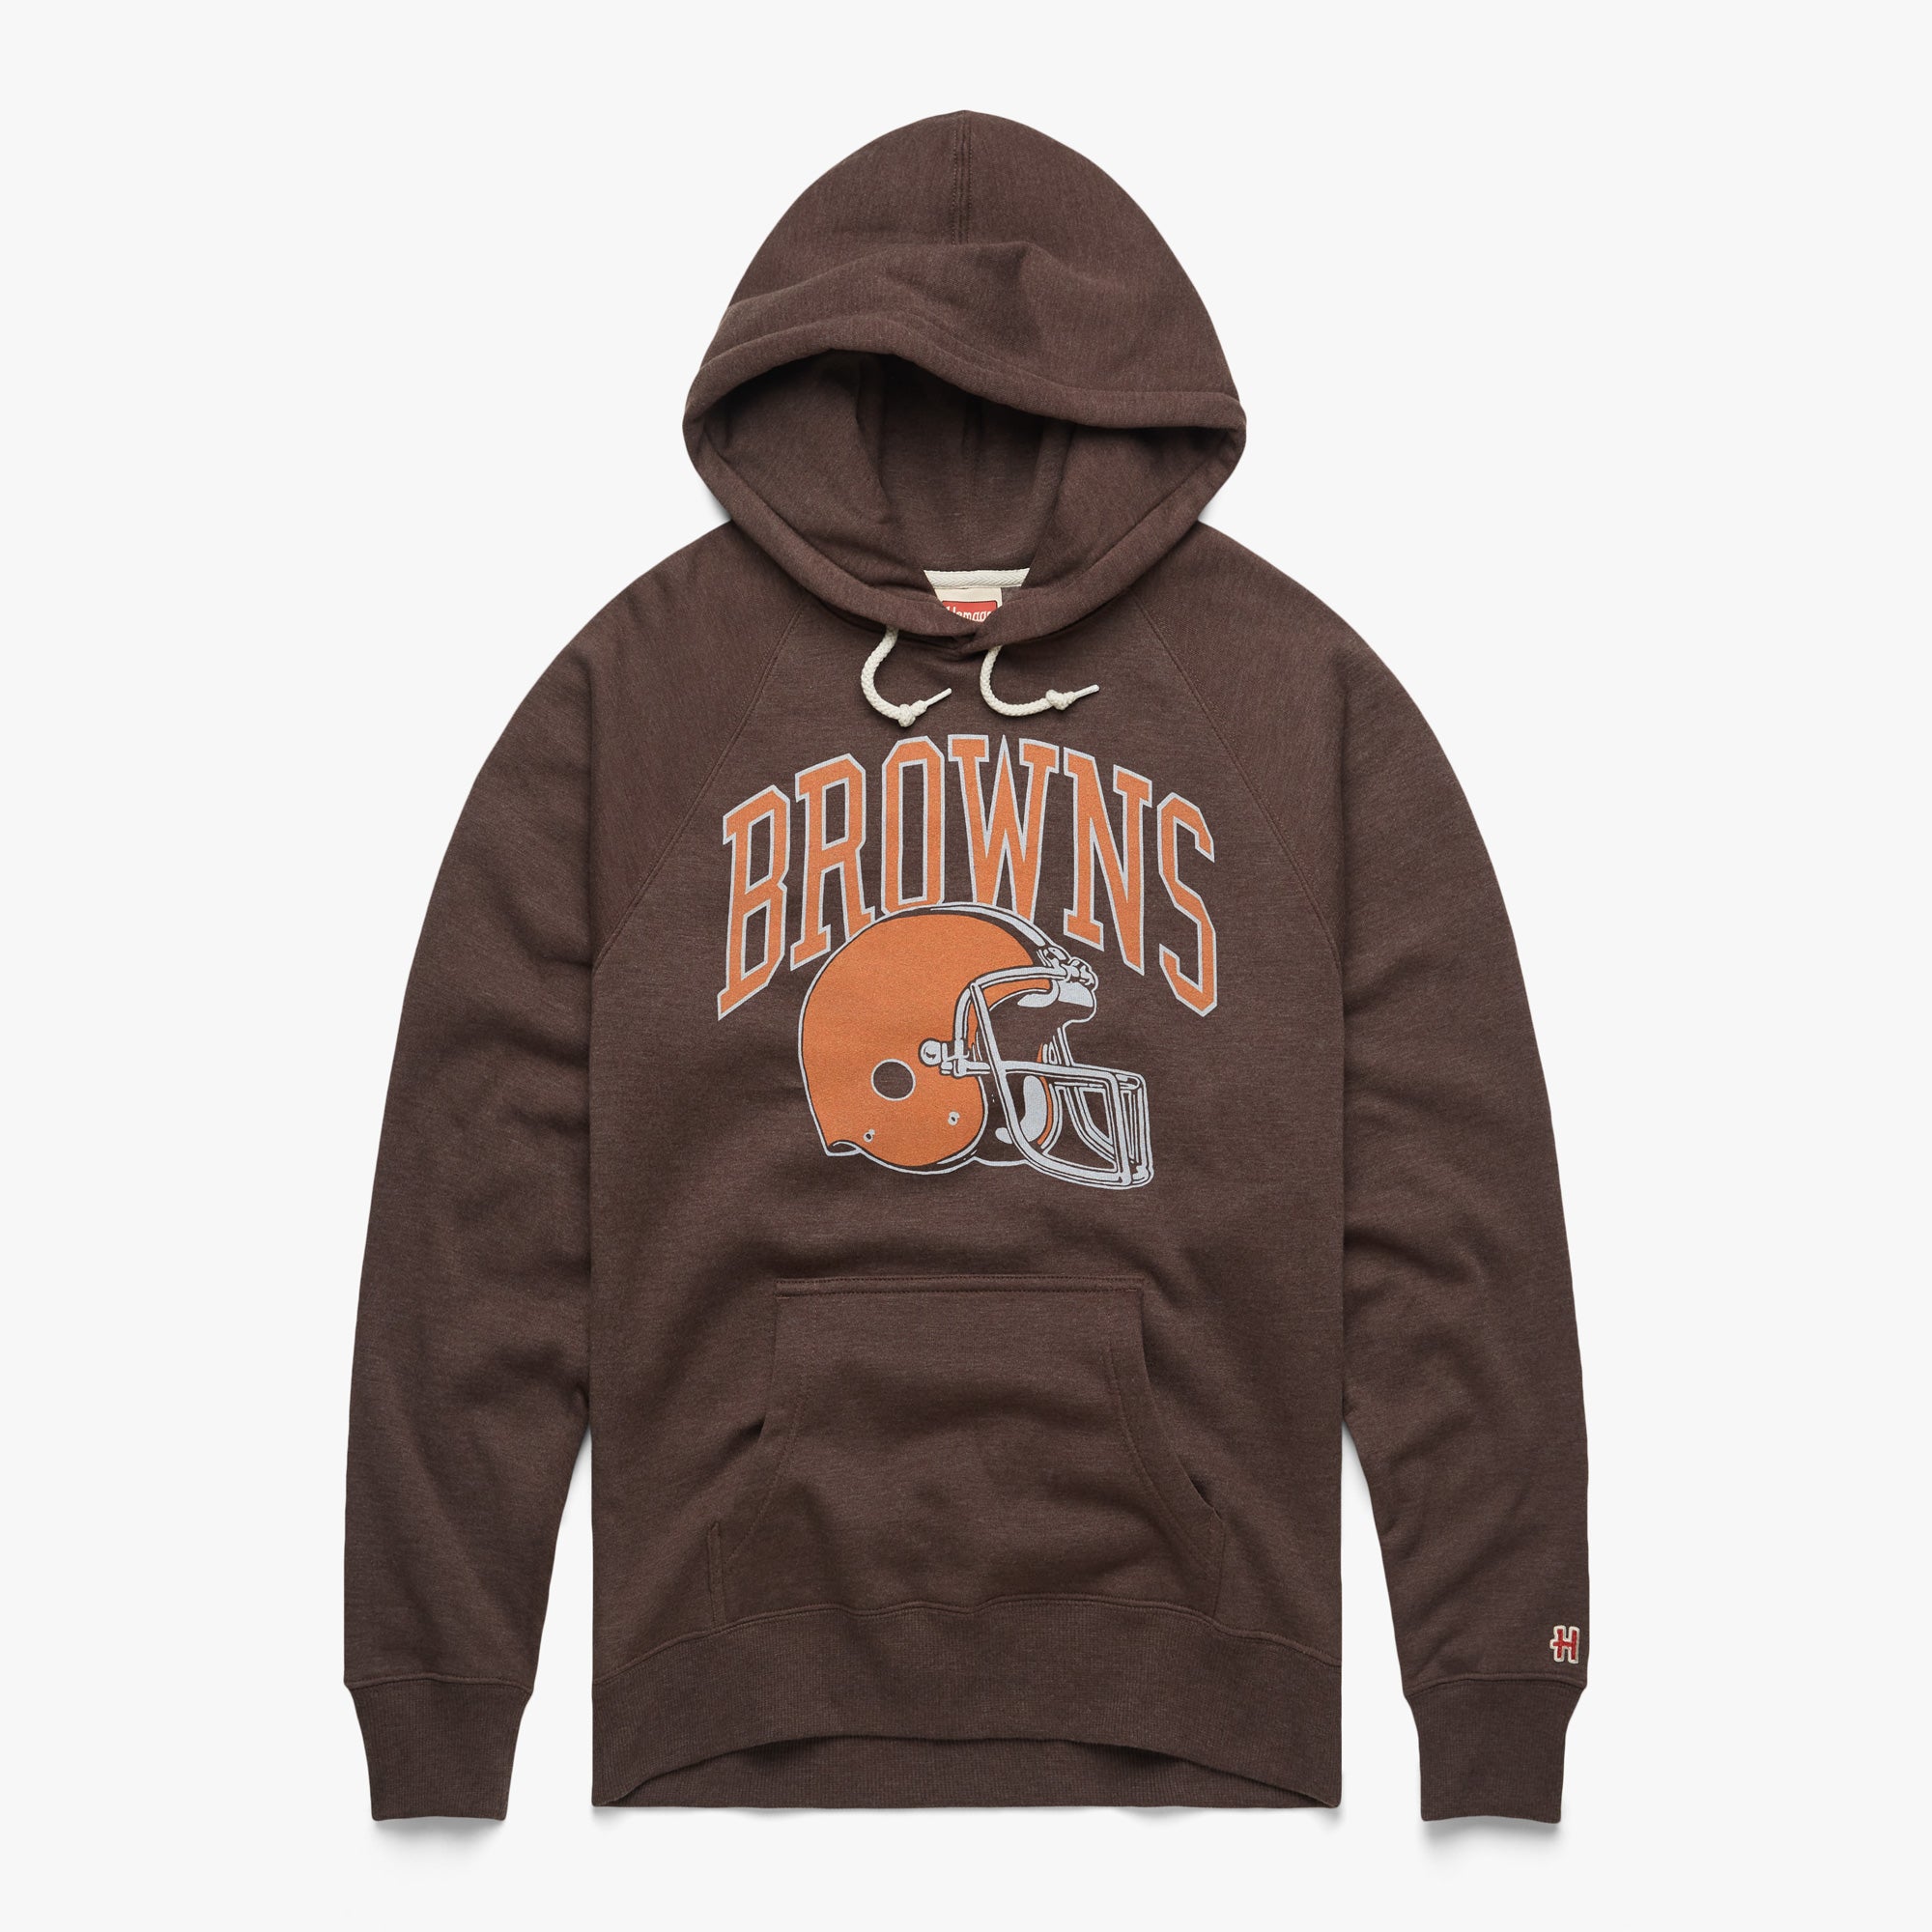 Cleveland Browns Helmet Retro Hoodie from Homage. | Officially Licensed Vintage NFL Apparel from Homage Pro Shop.